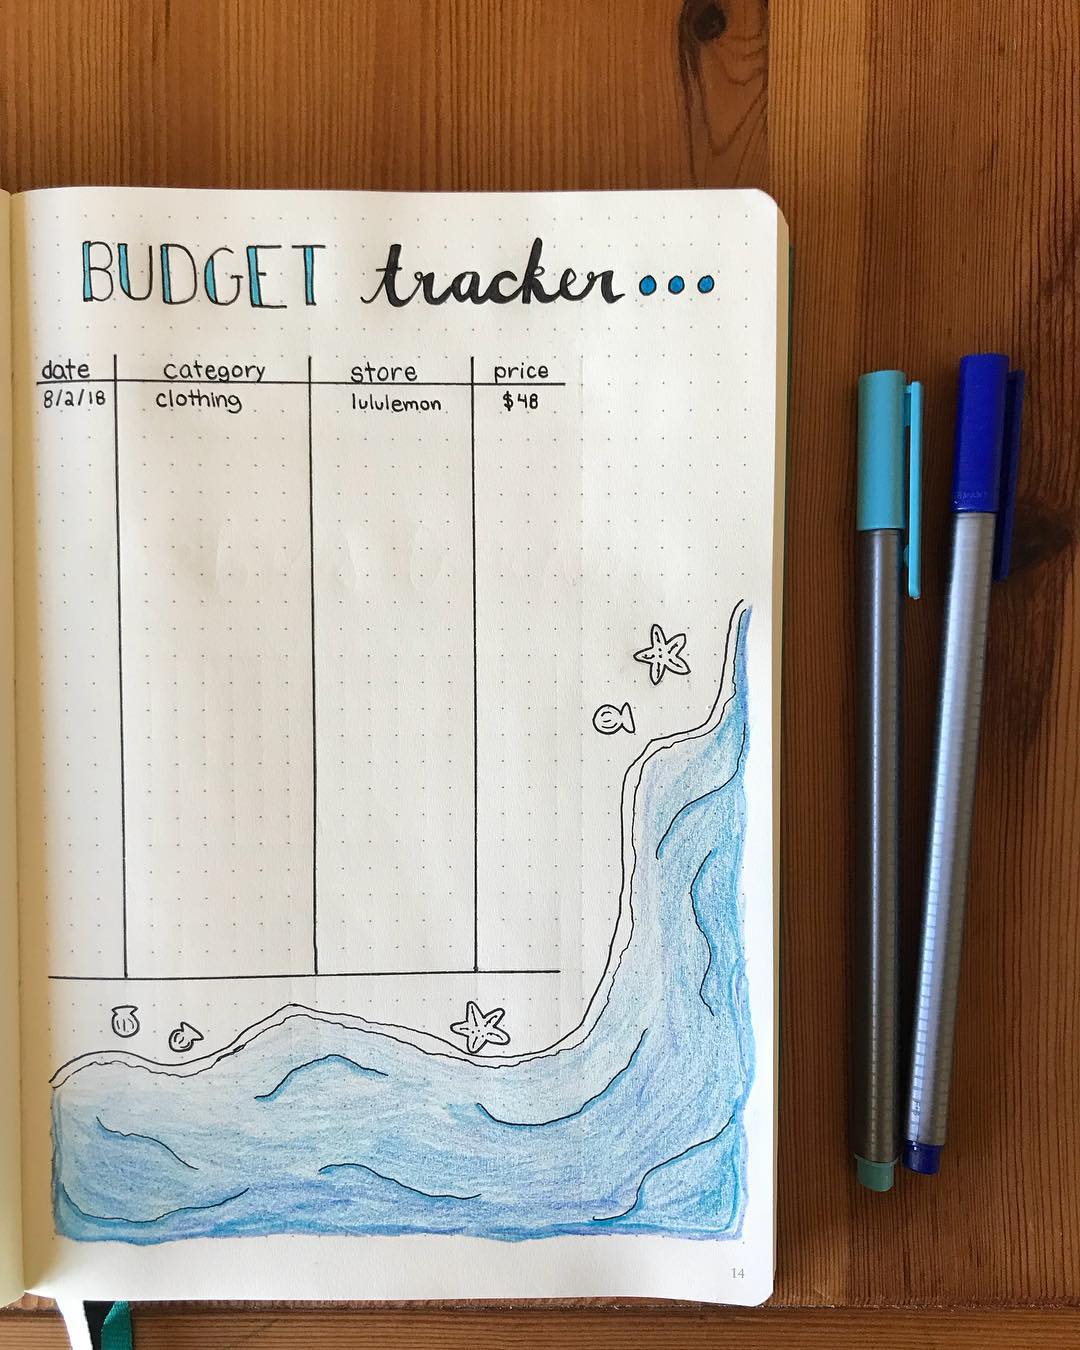 Notebook Being Used as a Budget Planner. Photo by Instagram user @studyinlavender